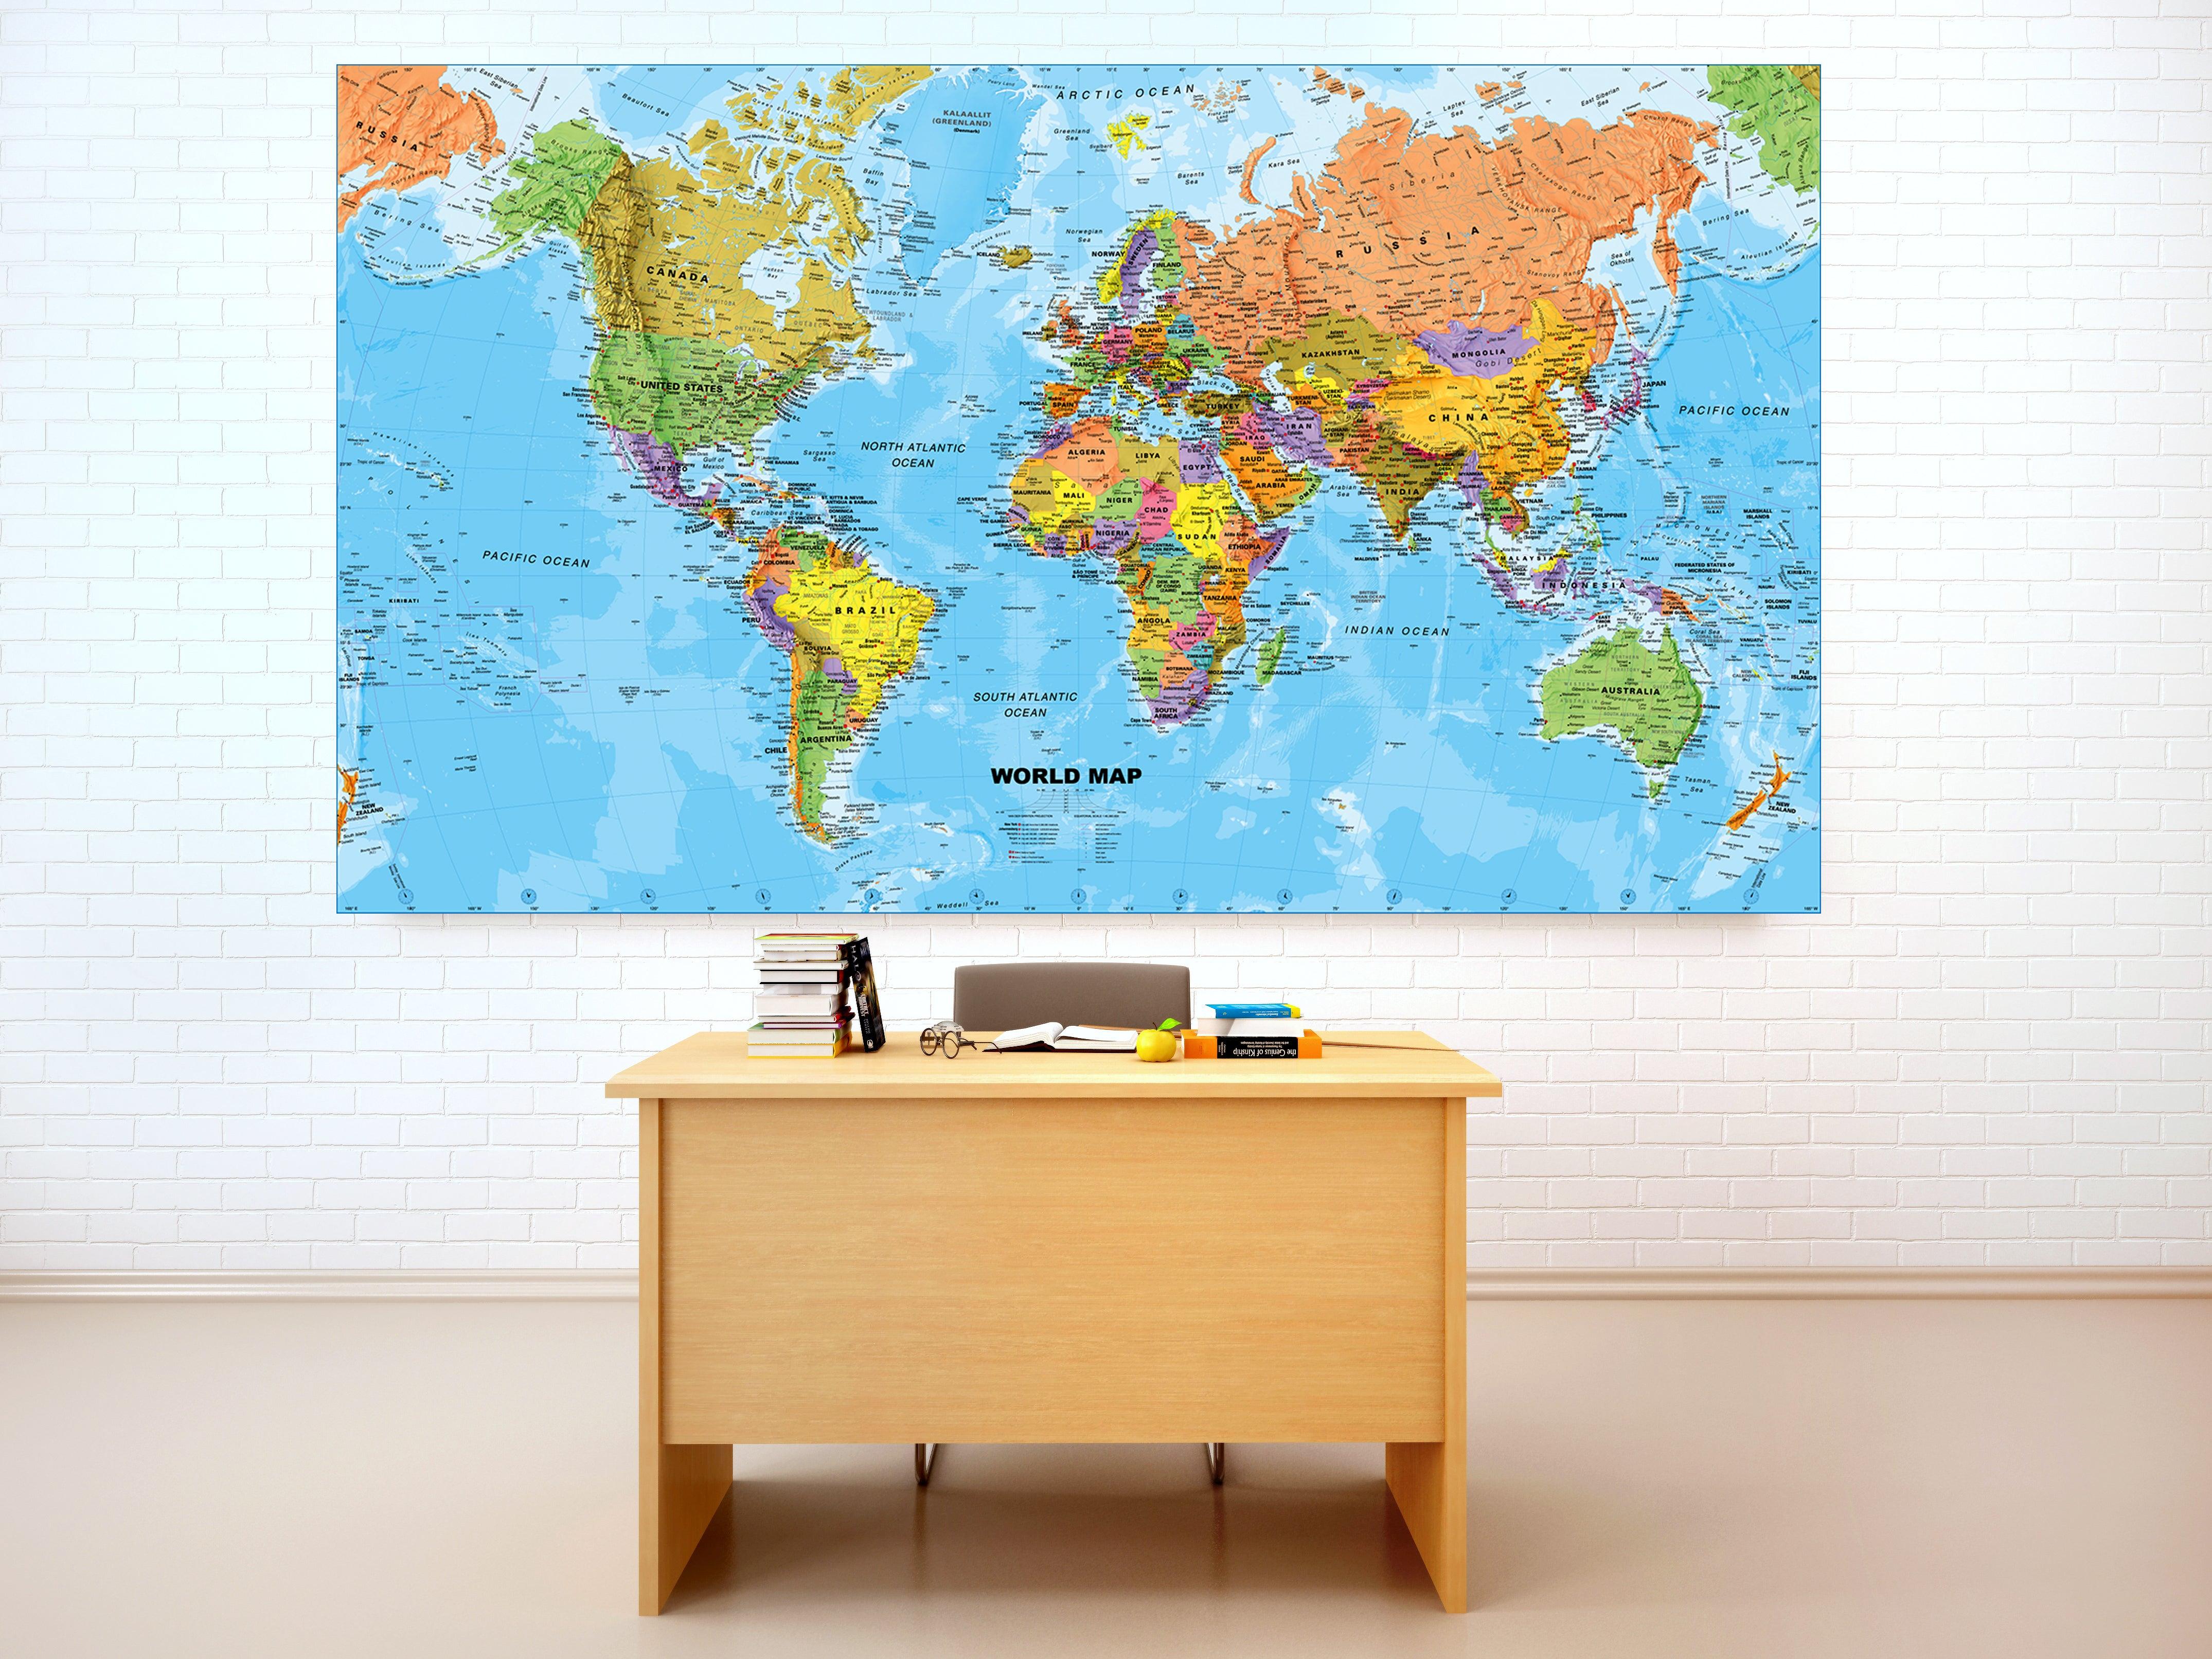 CoolWalls.ca diecut World Map Wall Decal Sticker Wallpaper, PEEL-N-STICK, removable anytime. Great for a classroom